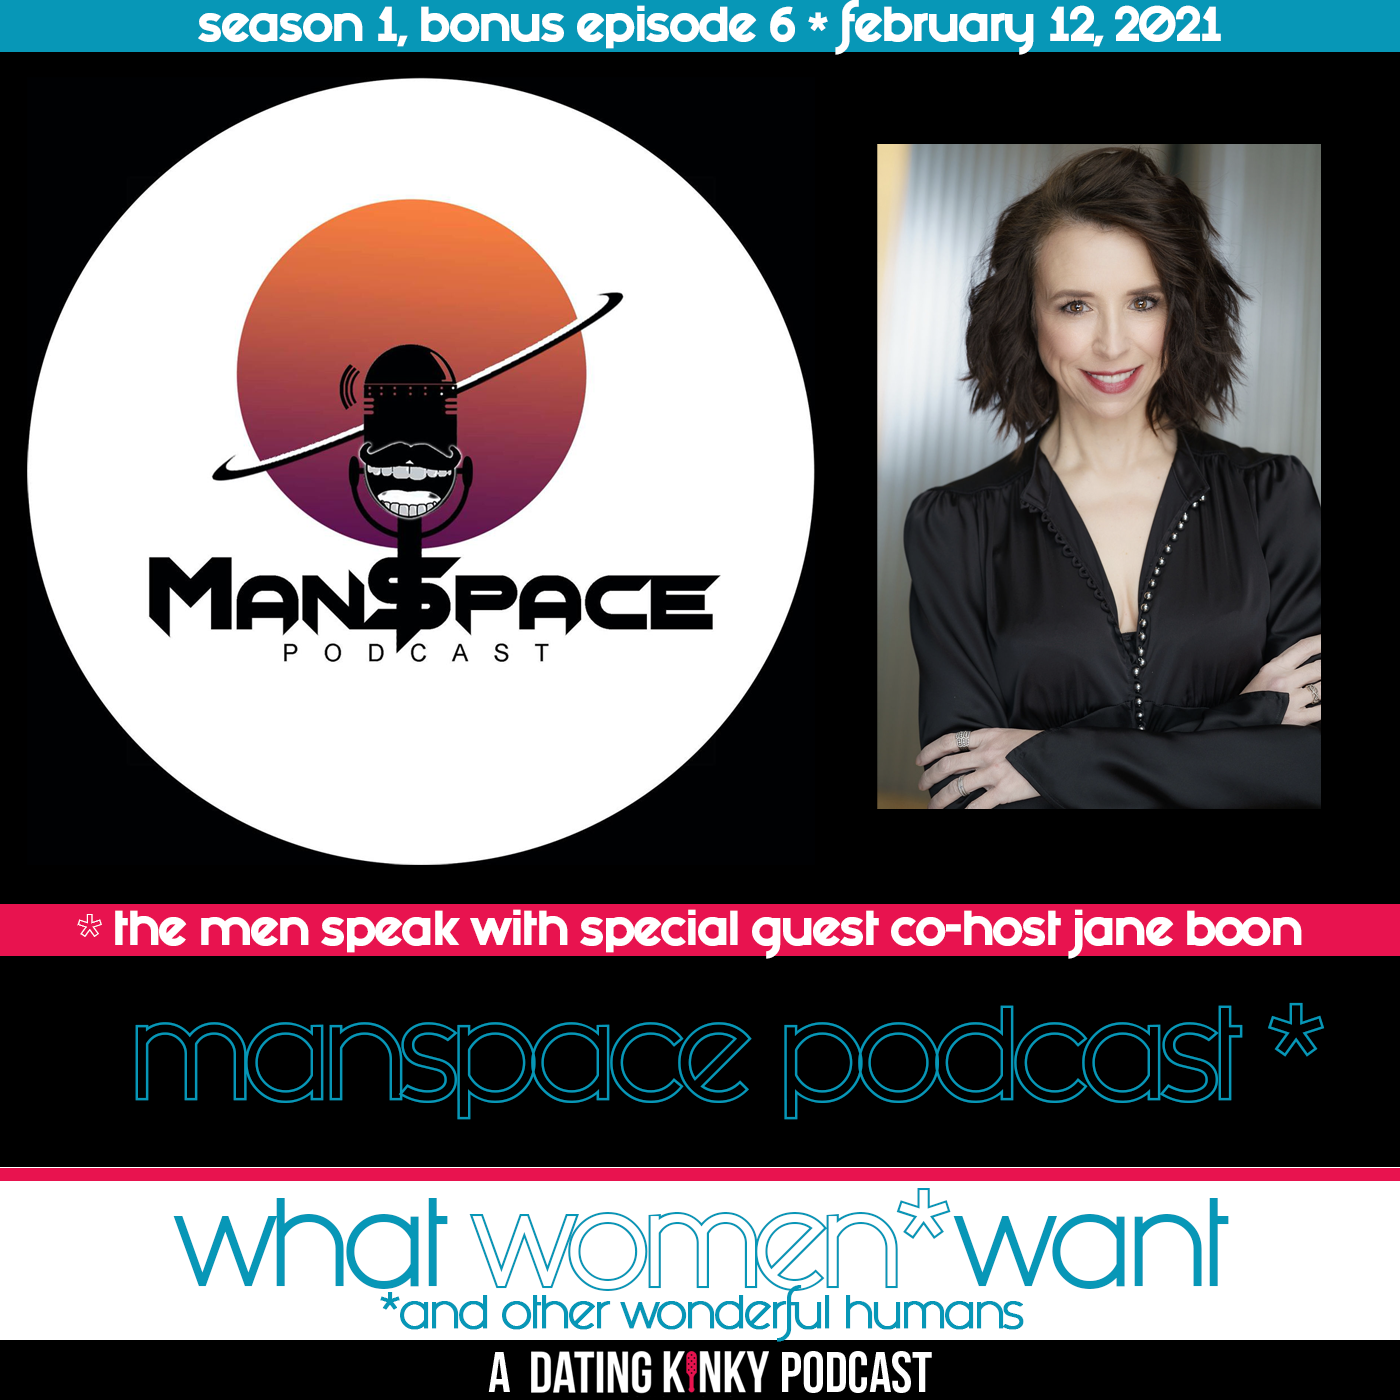 Into Manspace with Russ and Les